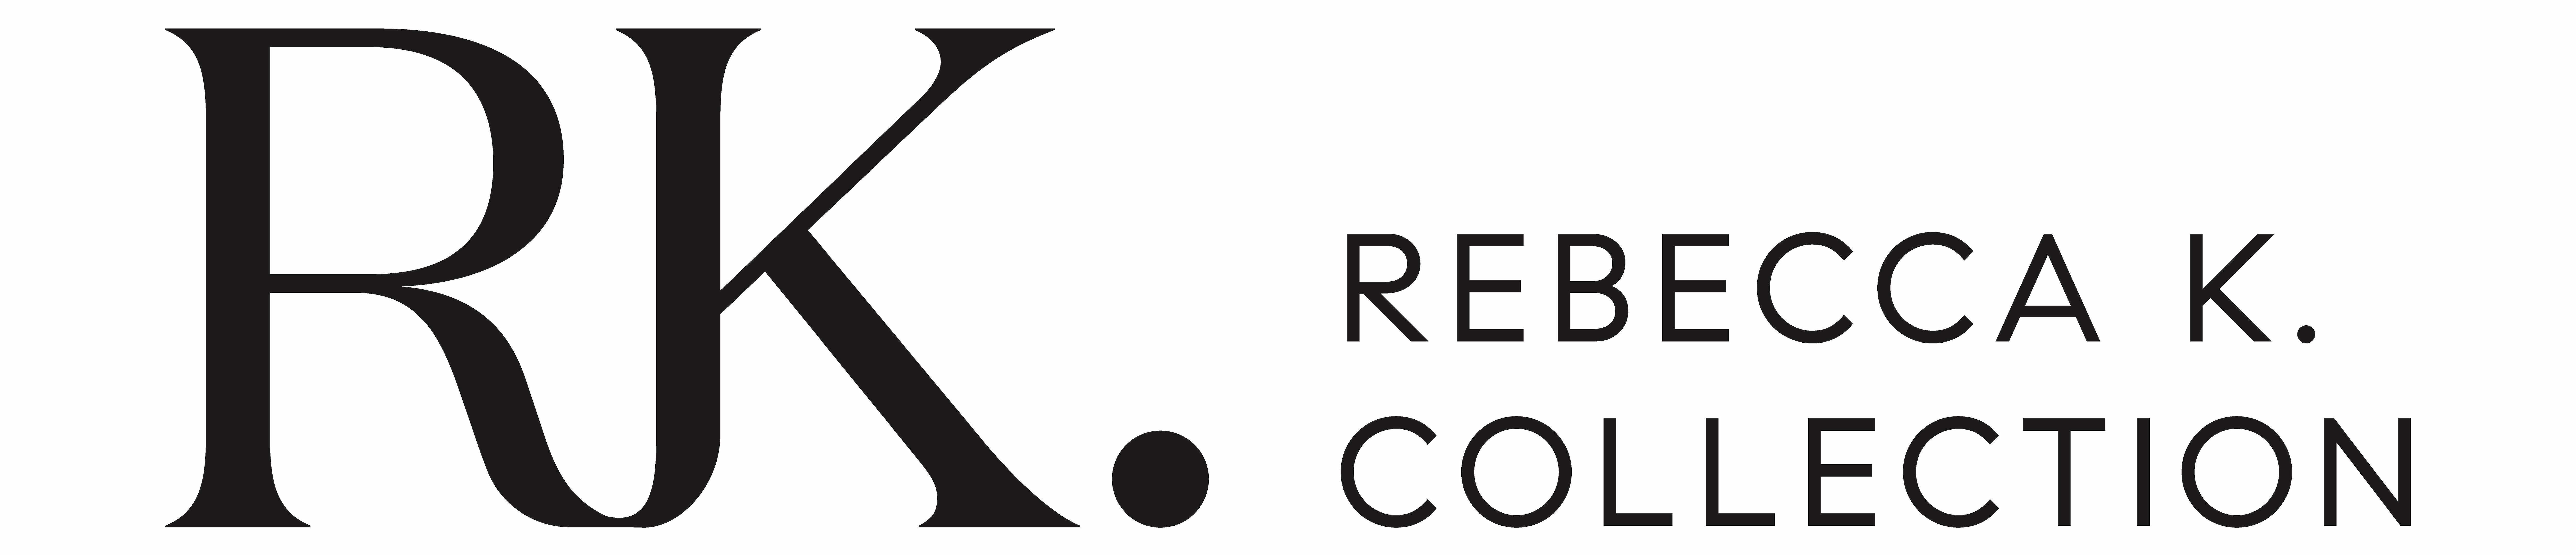 A text banner for the Rebecca K. Collection